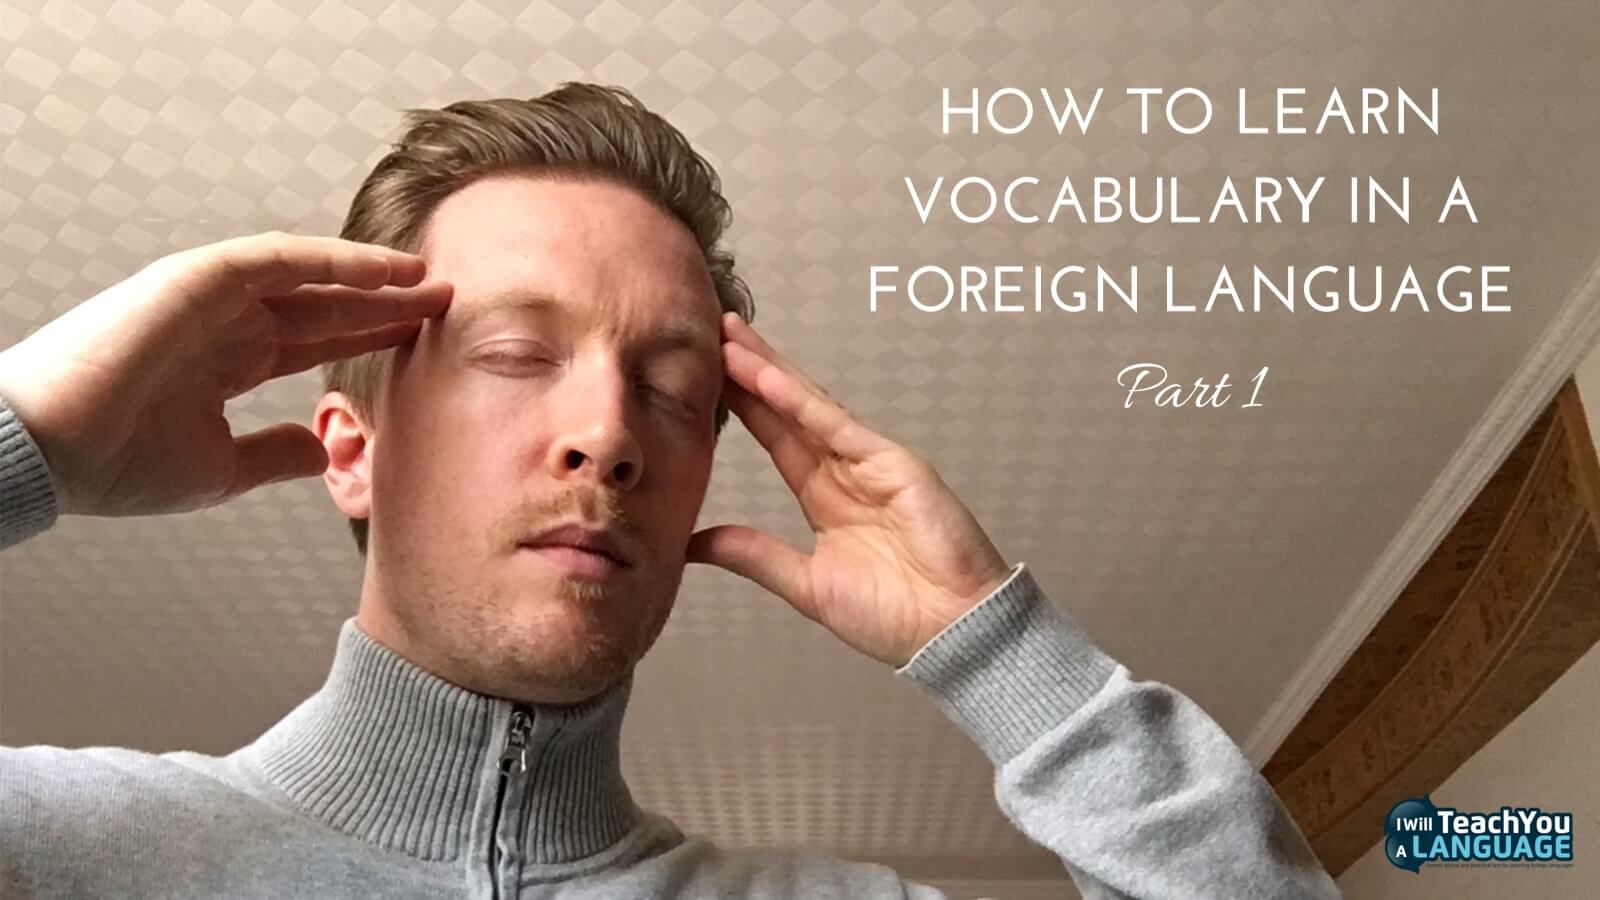 How To Learn Vocabulary In A Foreign Language - Part 1